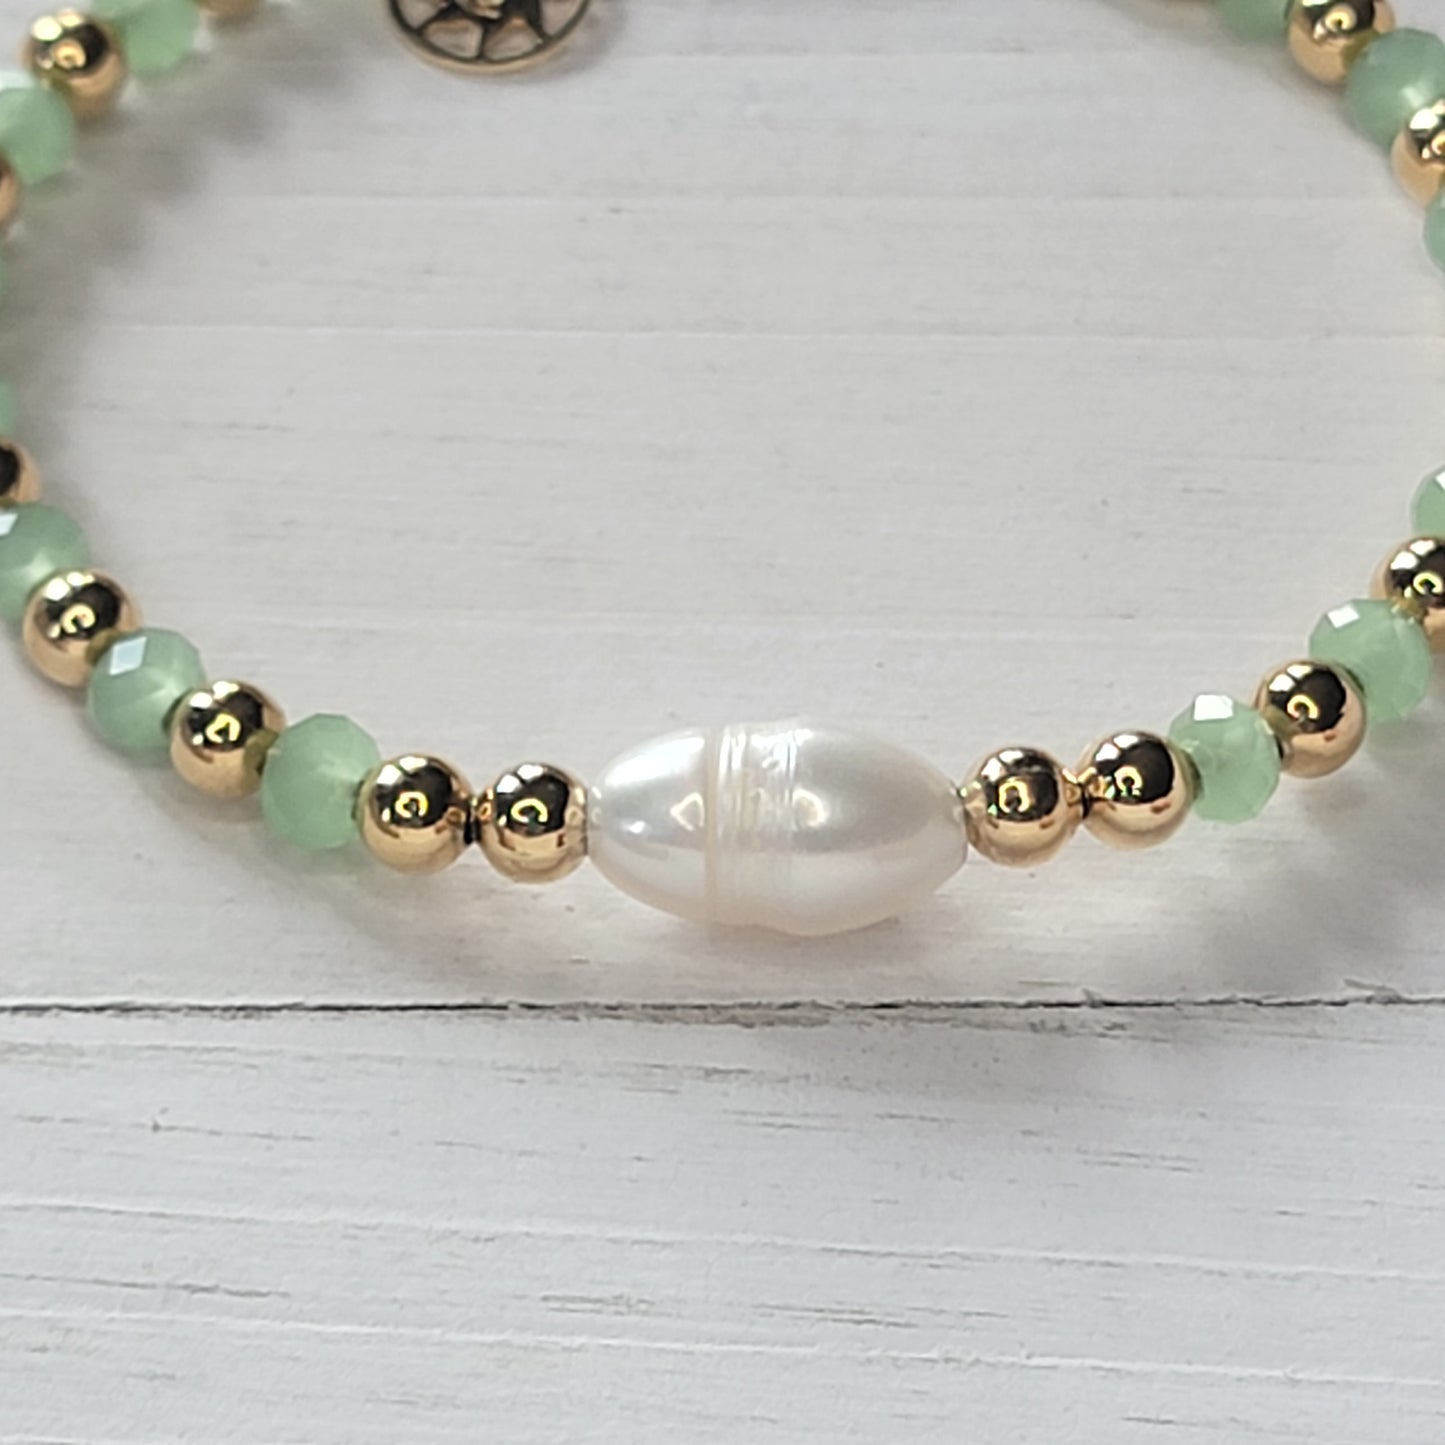 Adjustable Bracelet with 18k Gold-filled Beads, Crystals, and Freshwater Pearl. Many Colors Available